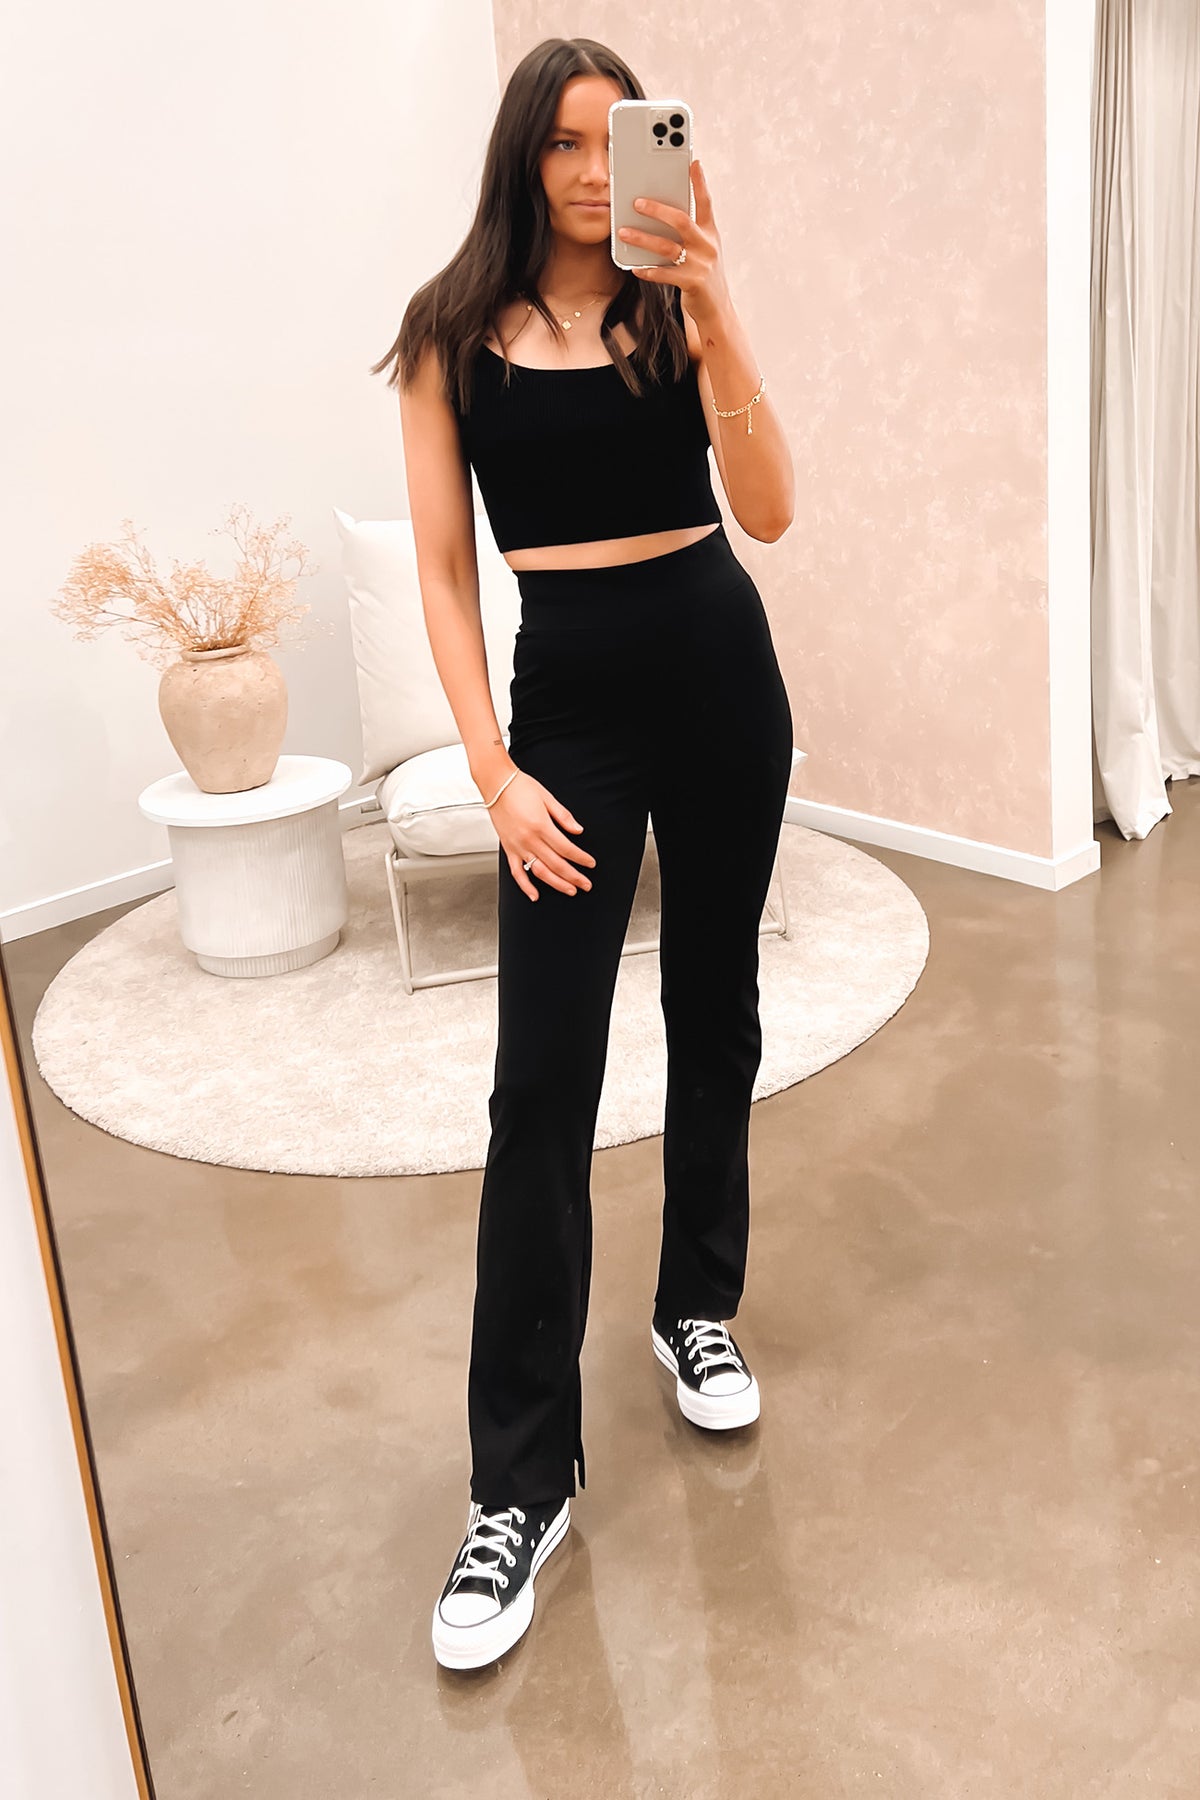 Buy AE Super High-Waisted Knit Flare Pant online